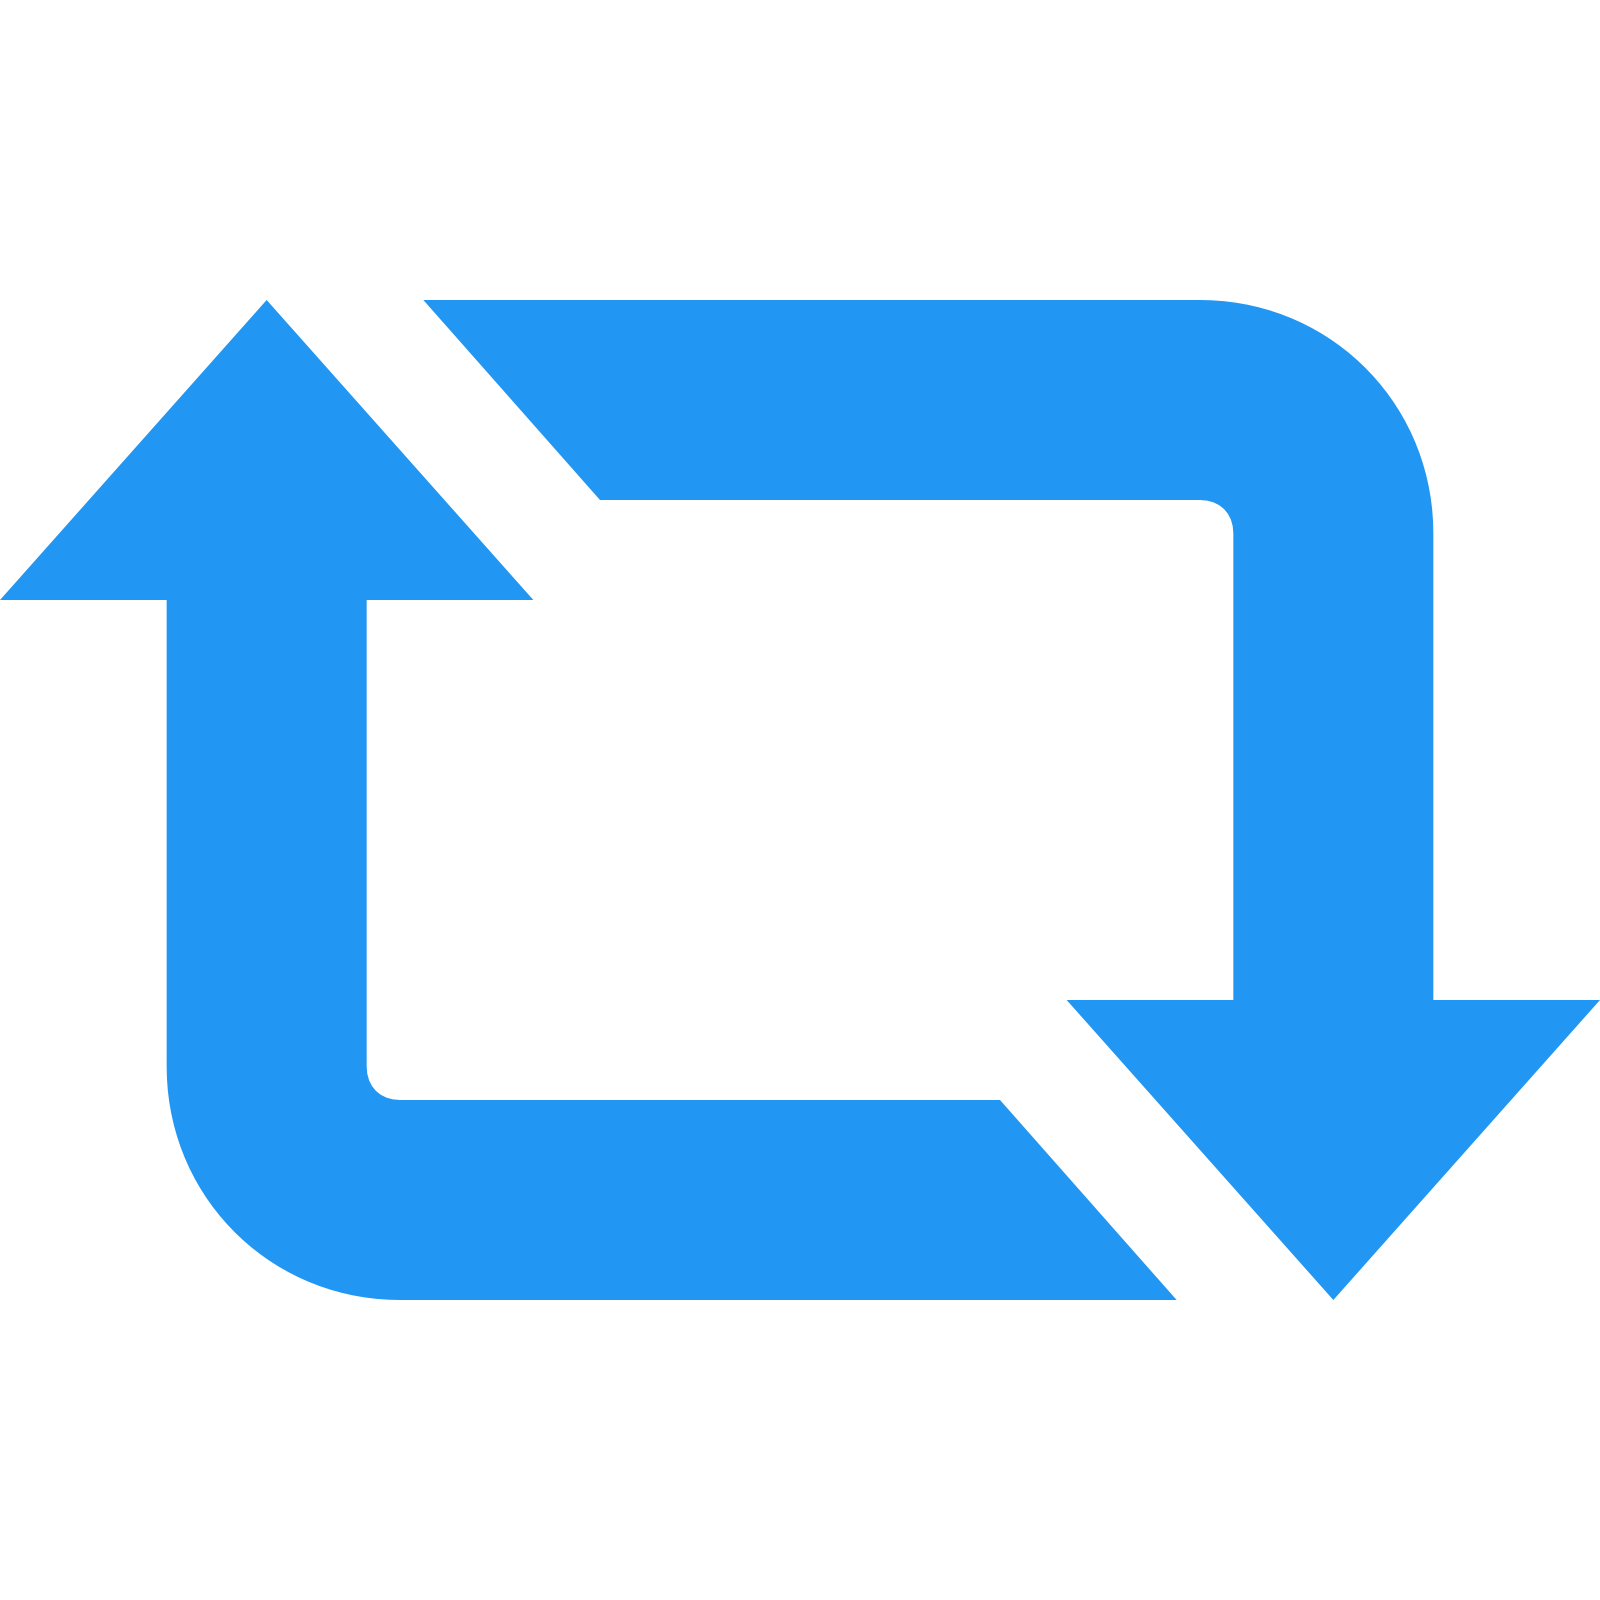 twitter share button png